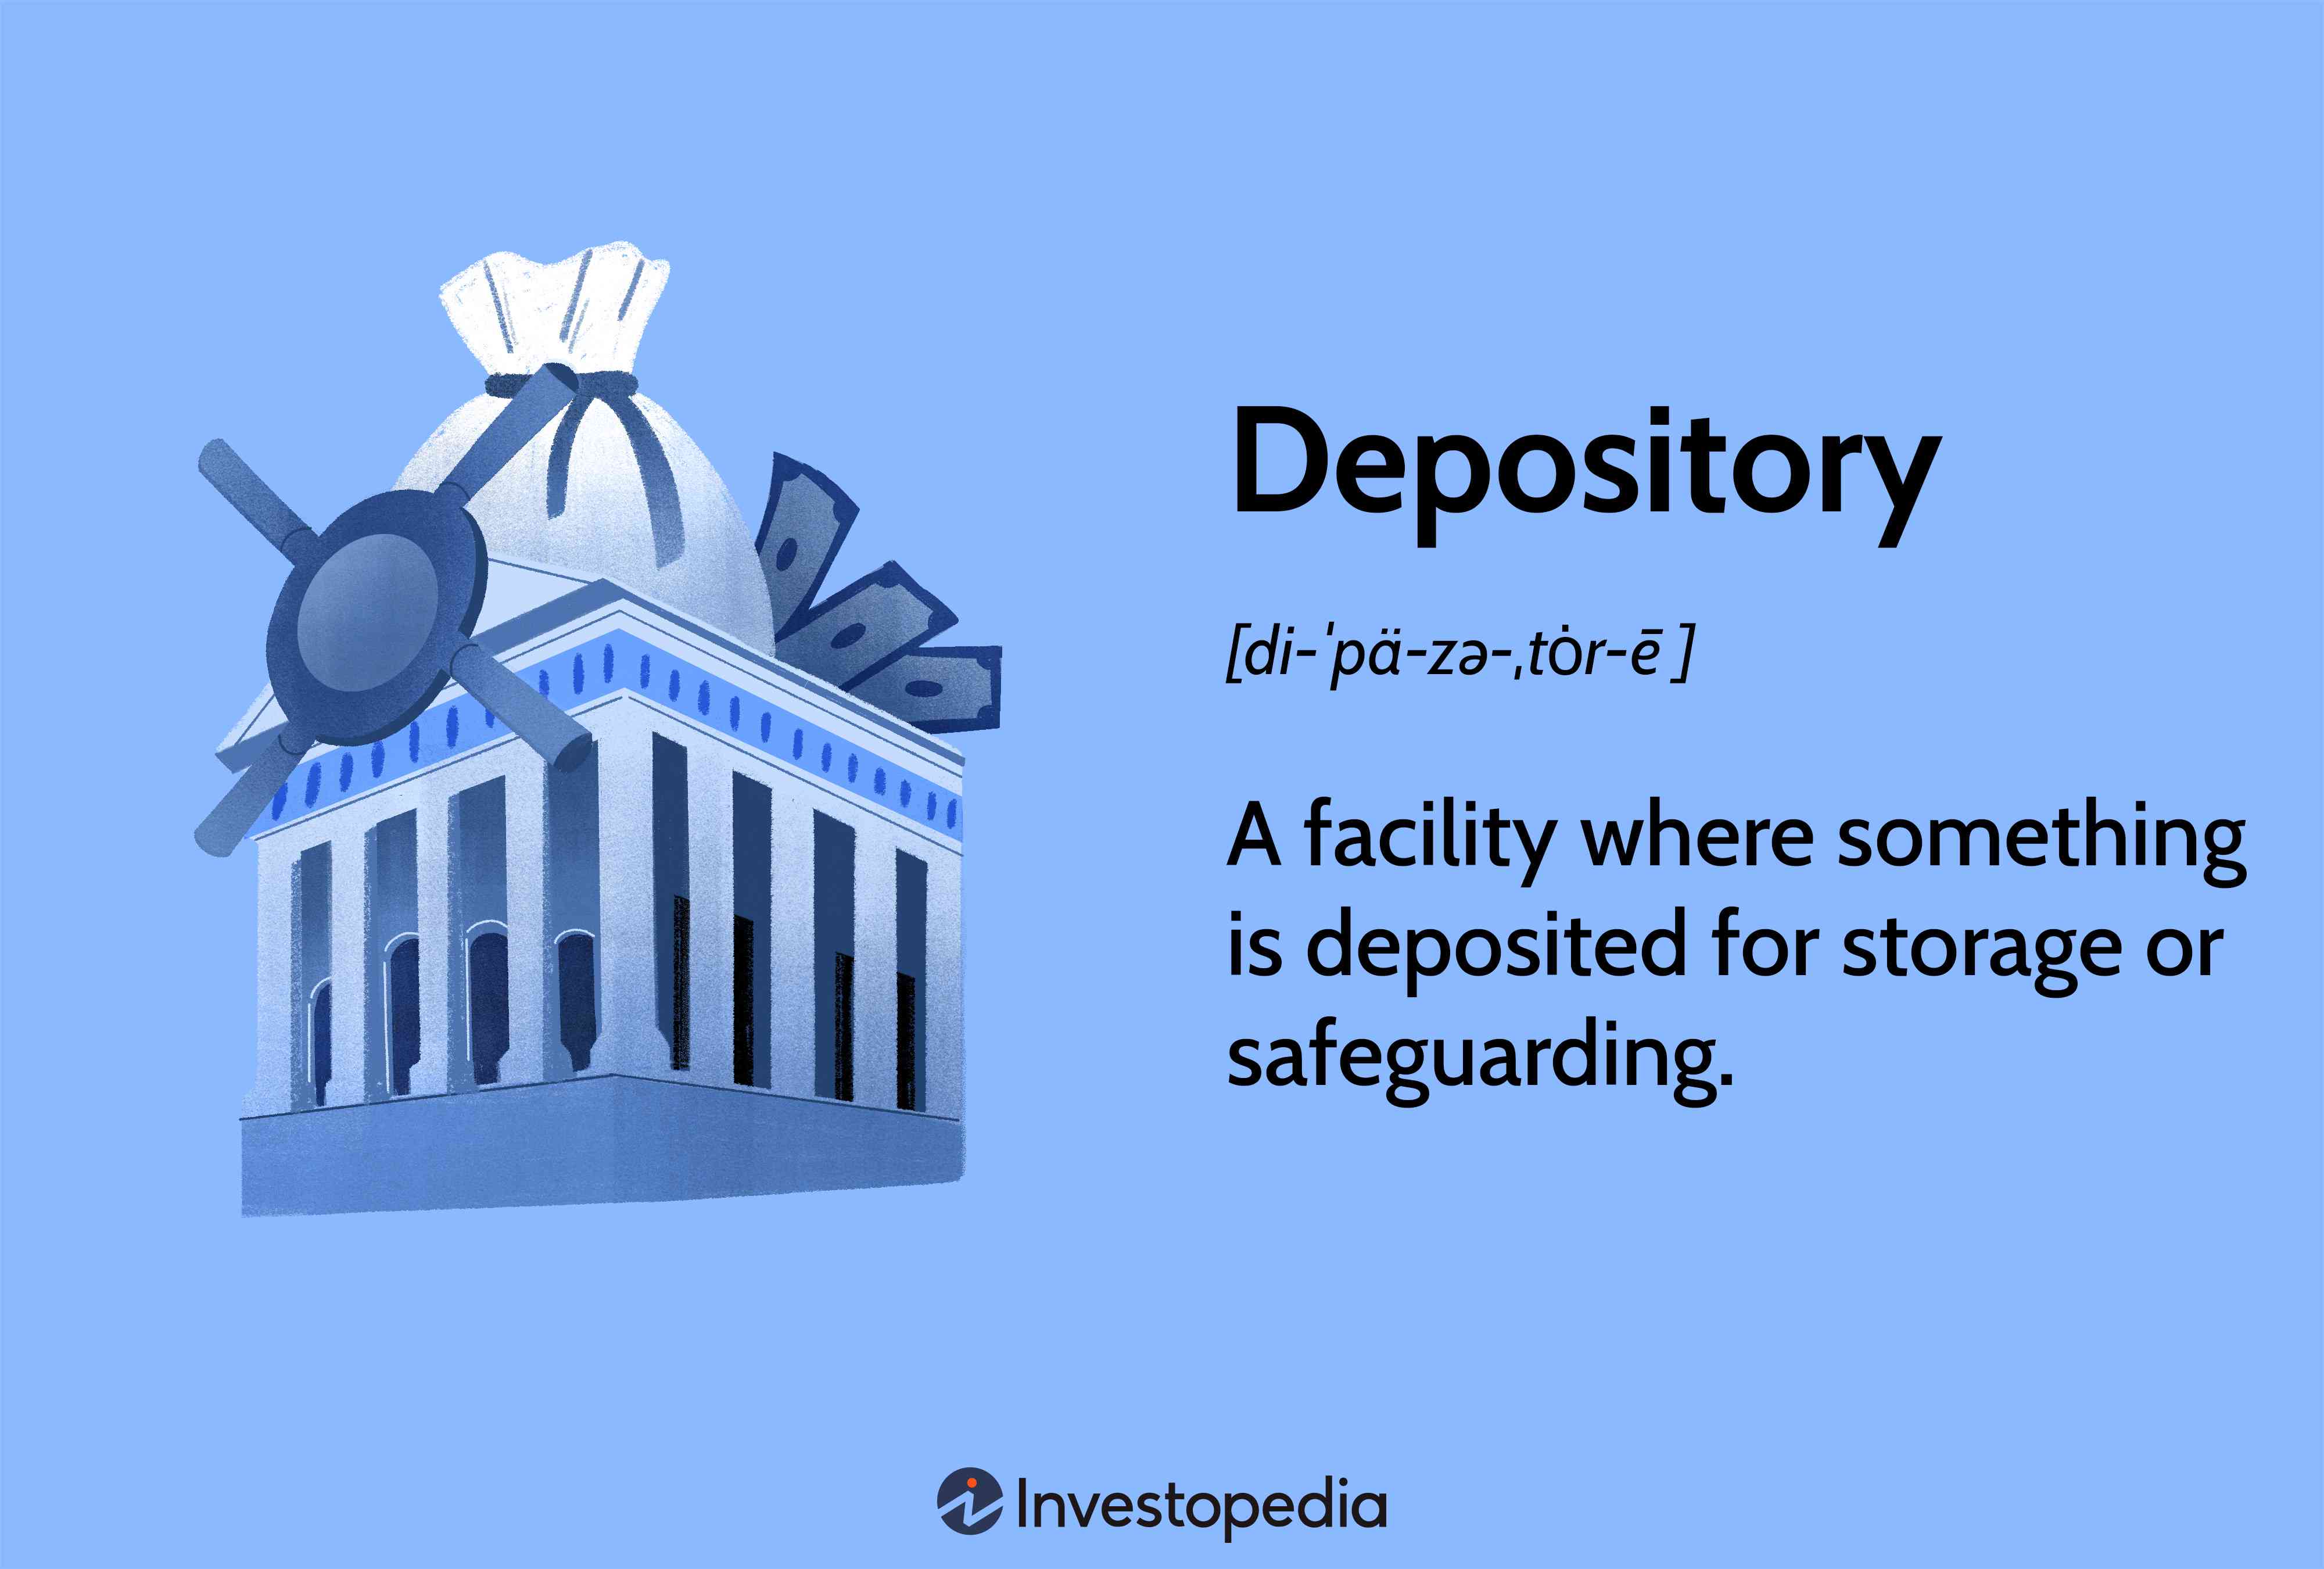 Depository: A facility where something is deposited for storage or safeguarding.